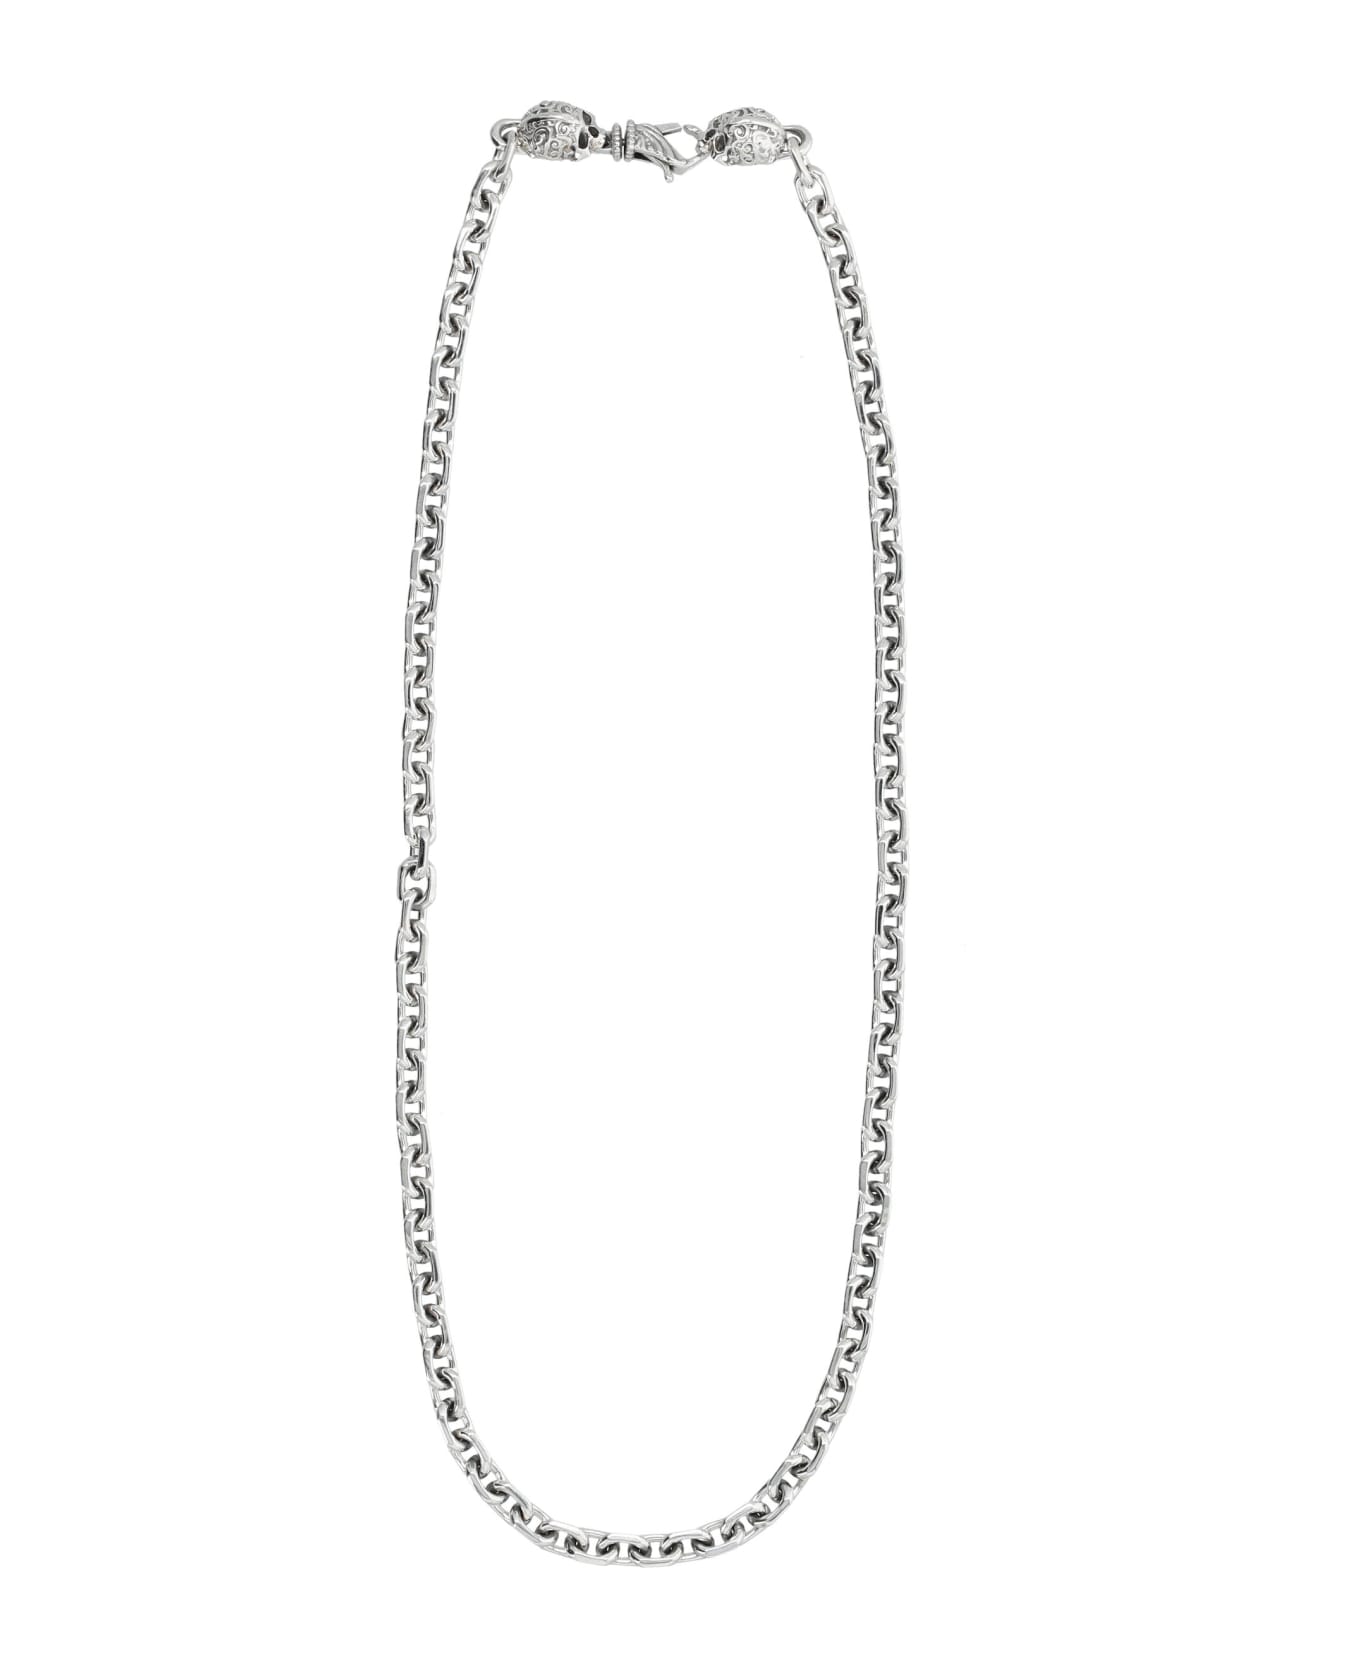 Emanuele Bicocchi Link Chain Necklace With Skulls - SILVER ネックレス